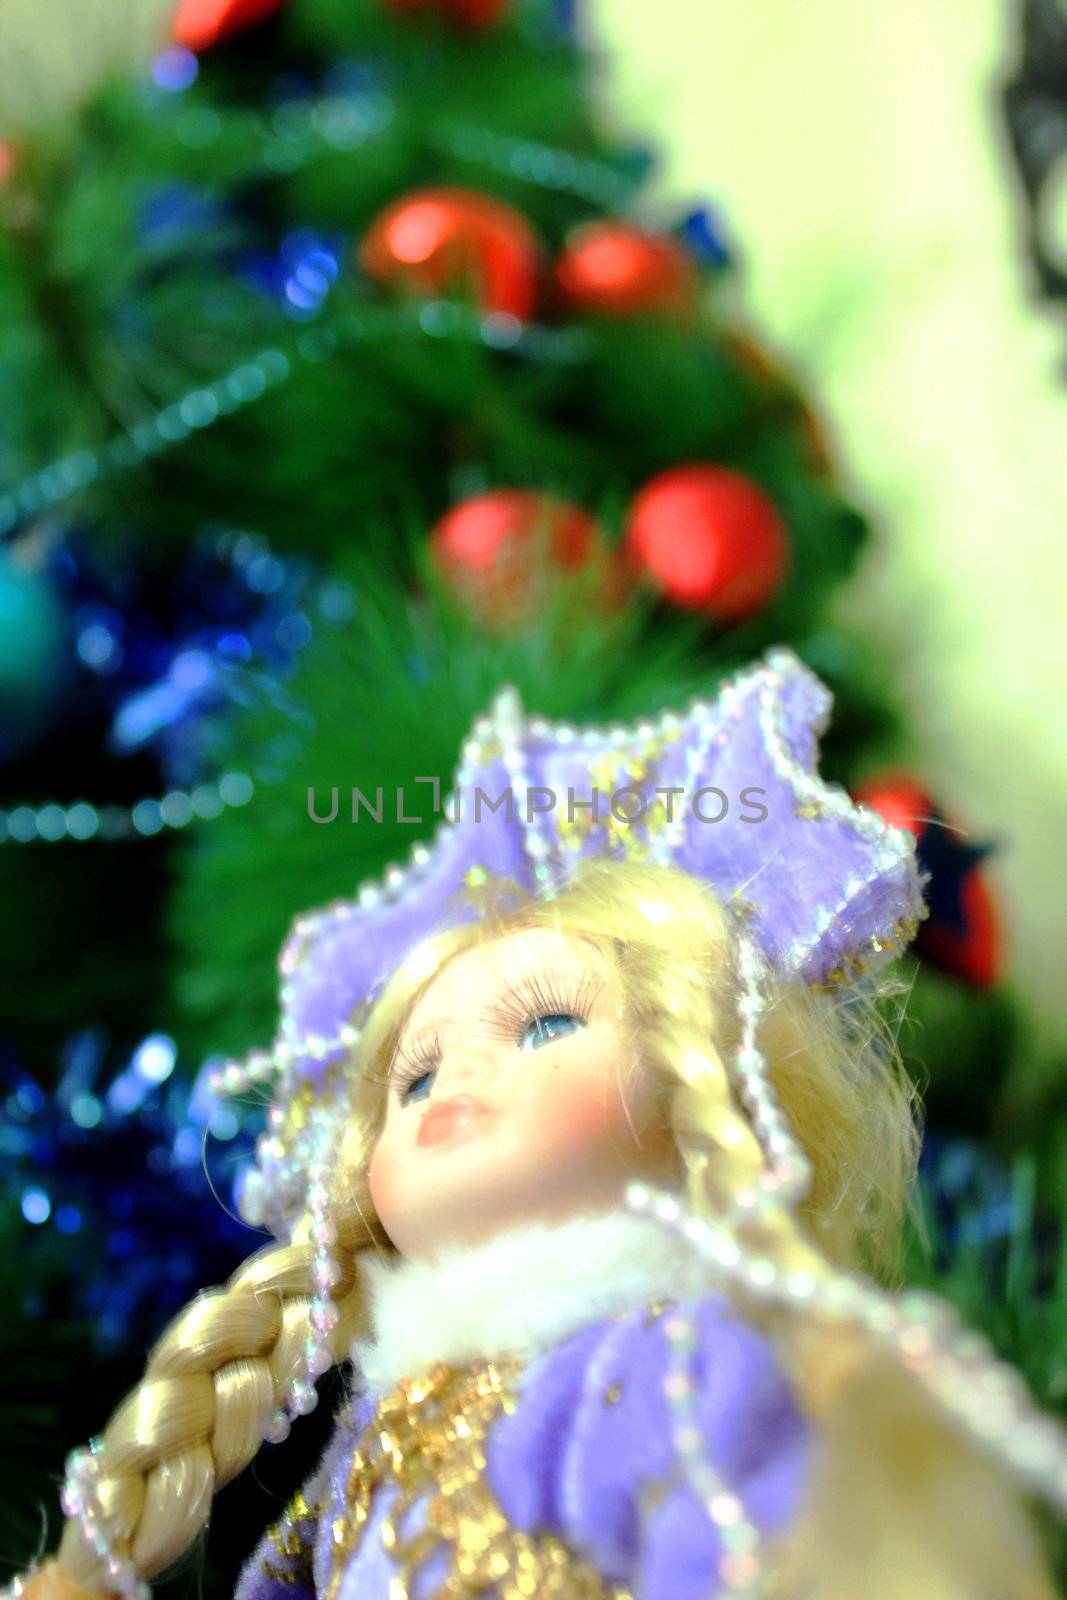 Snow Maiden on the background of a beautiful Christmas, Christmas tree ornaments